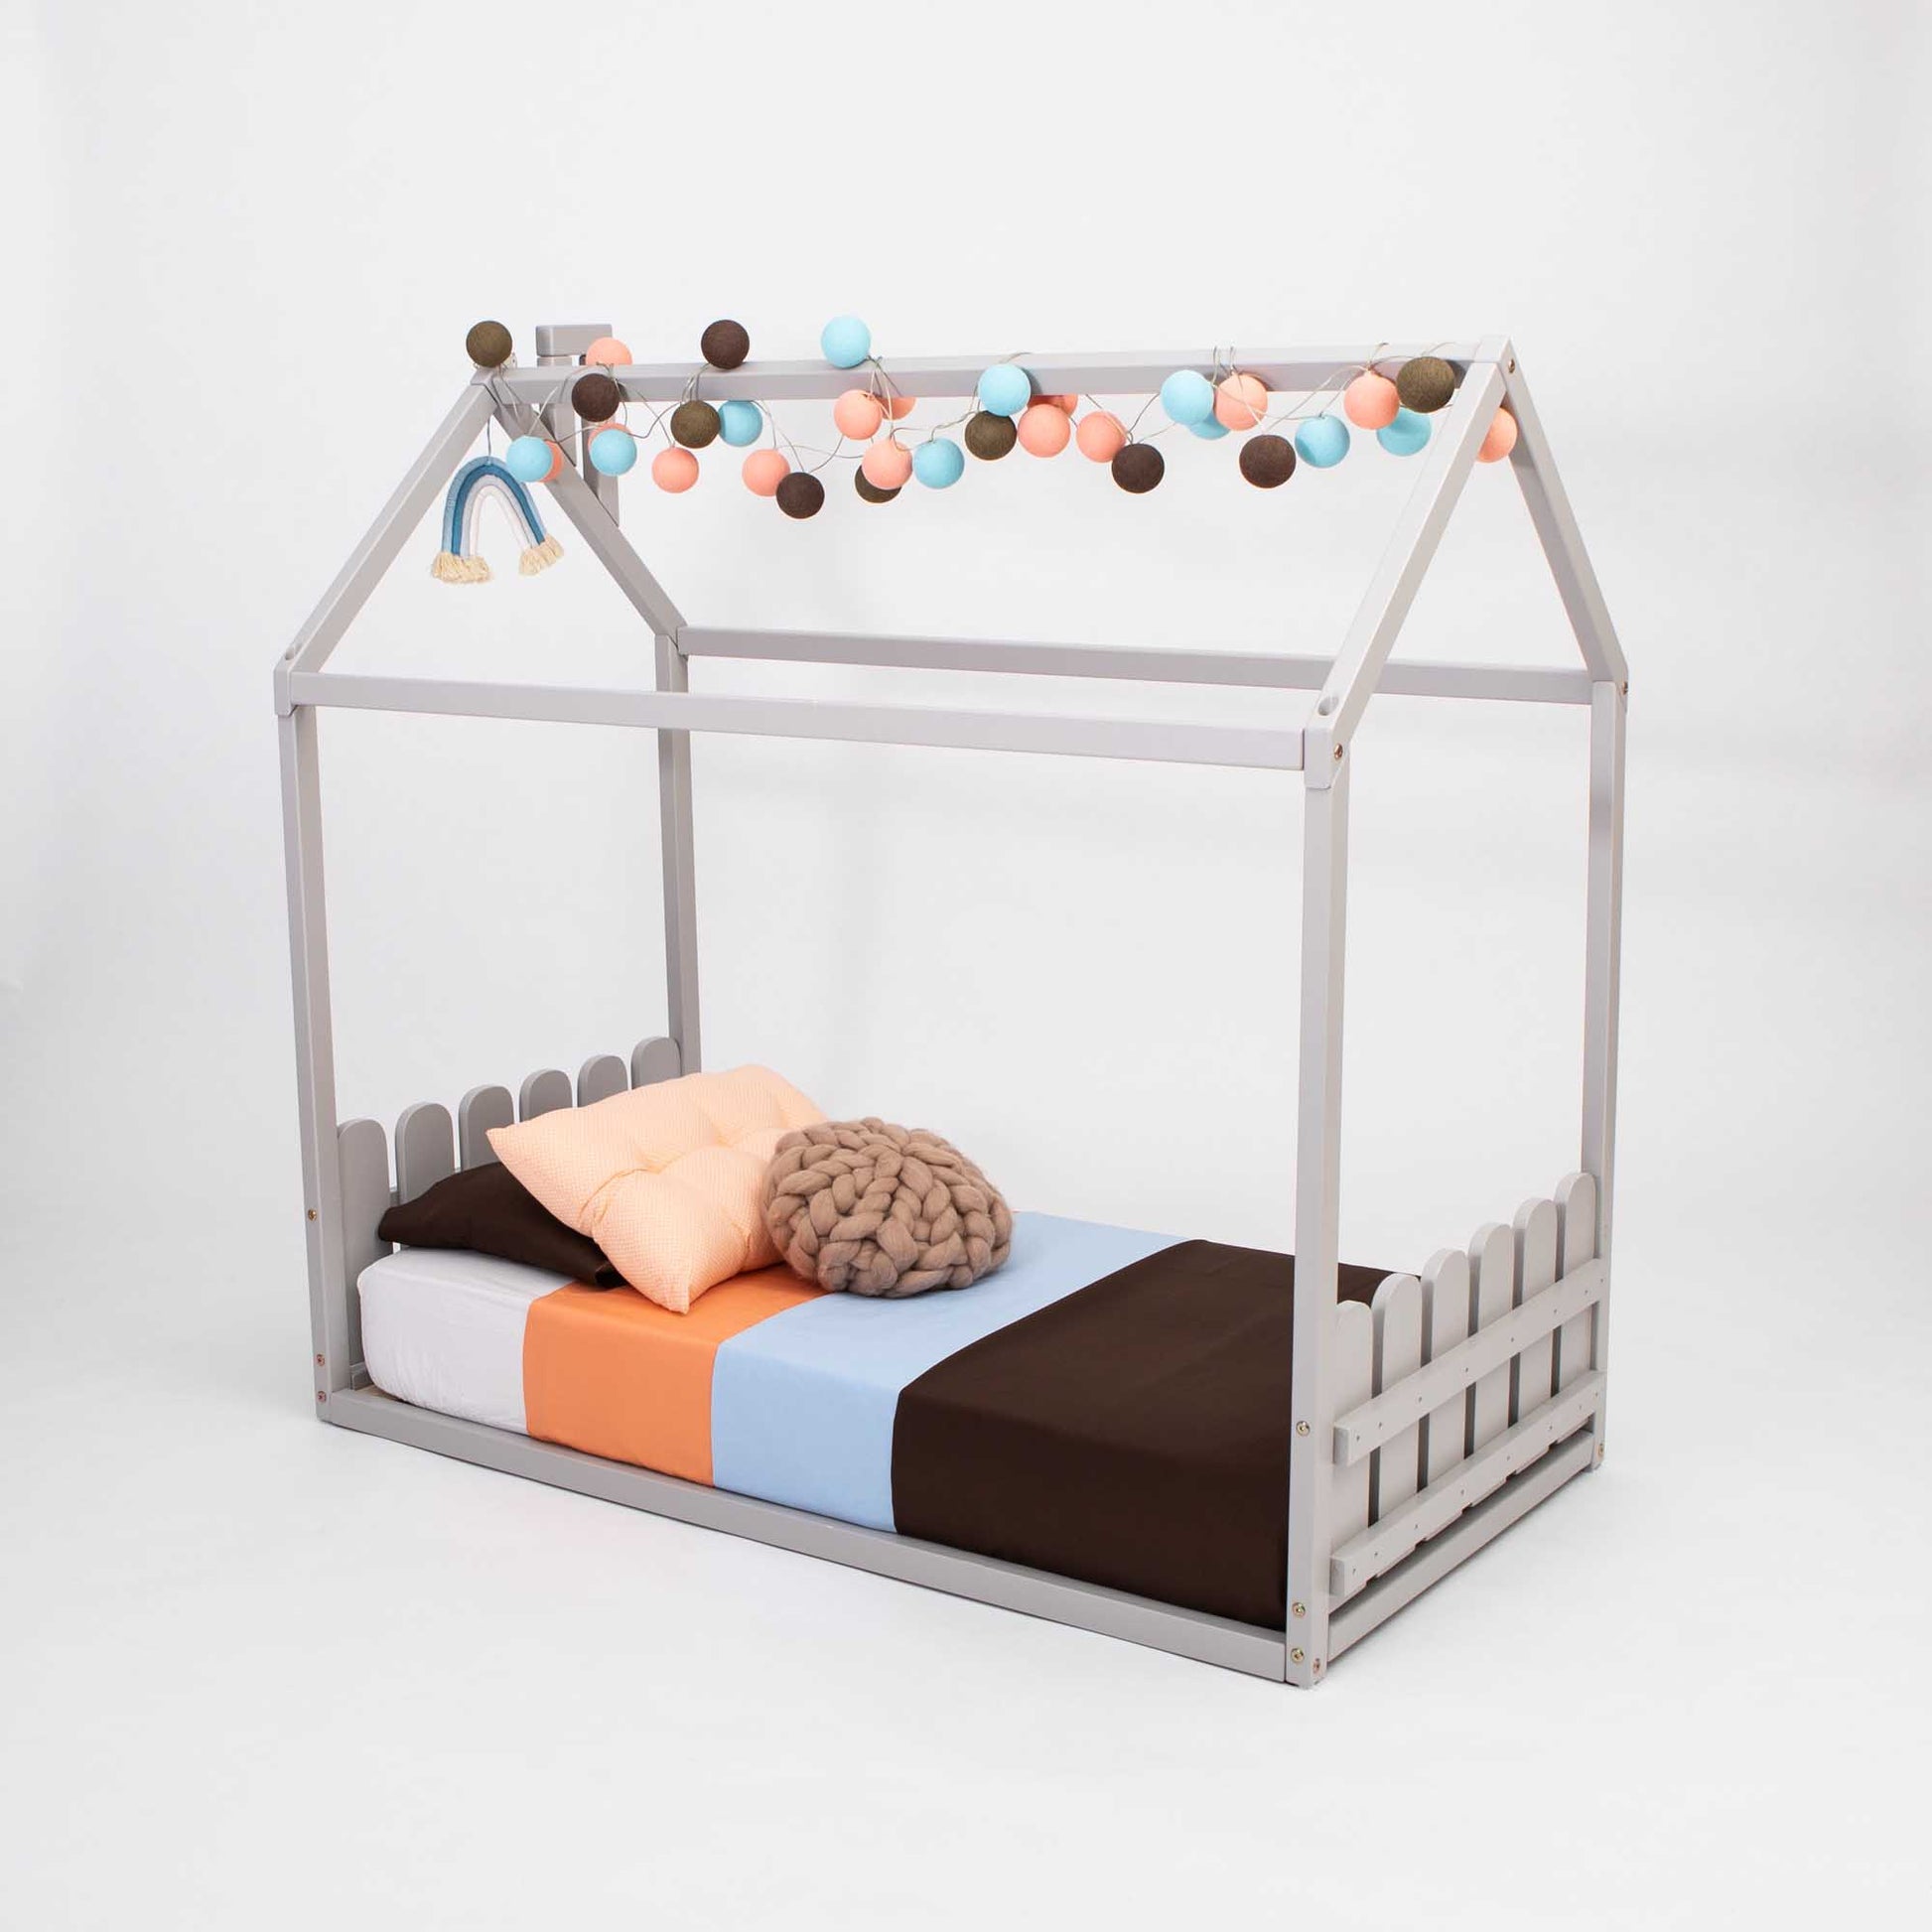 A Montessori house-frame bed with a picket fence headboard and footboard for toddlers with pom poms.